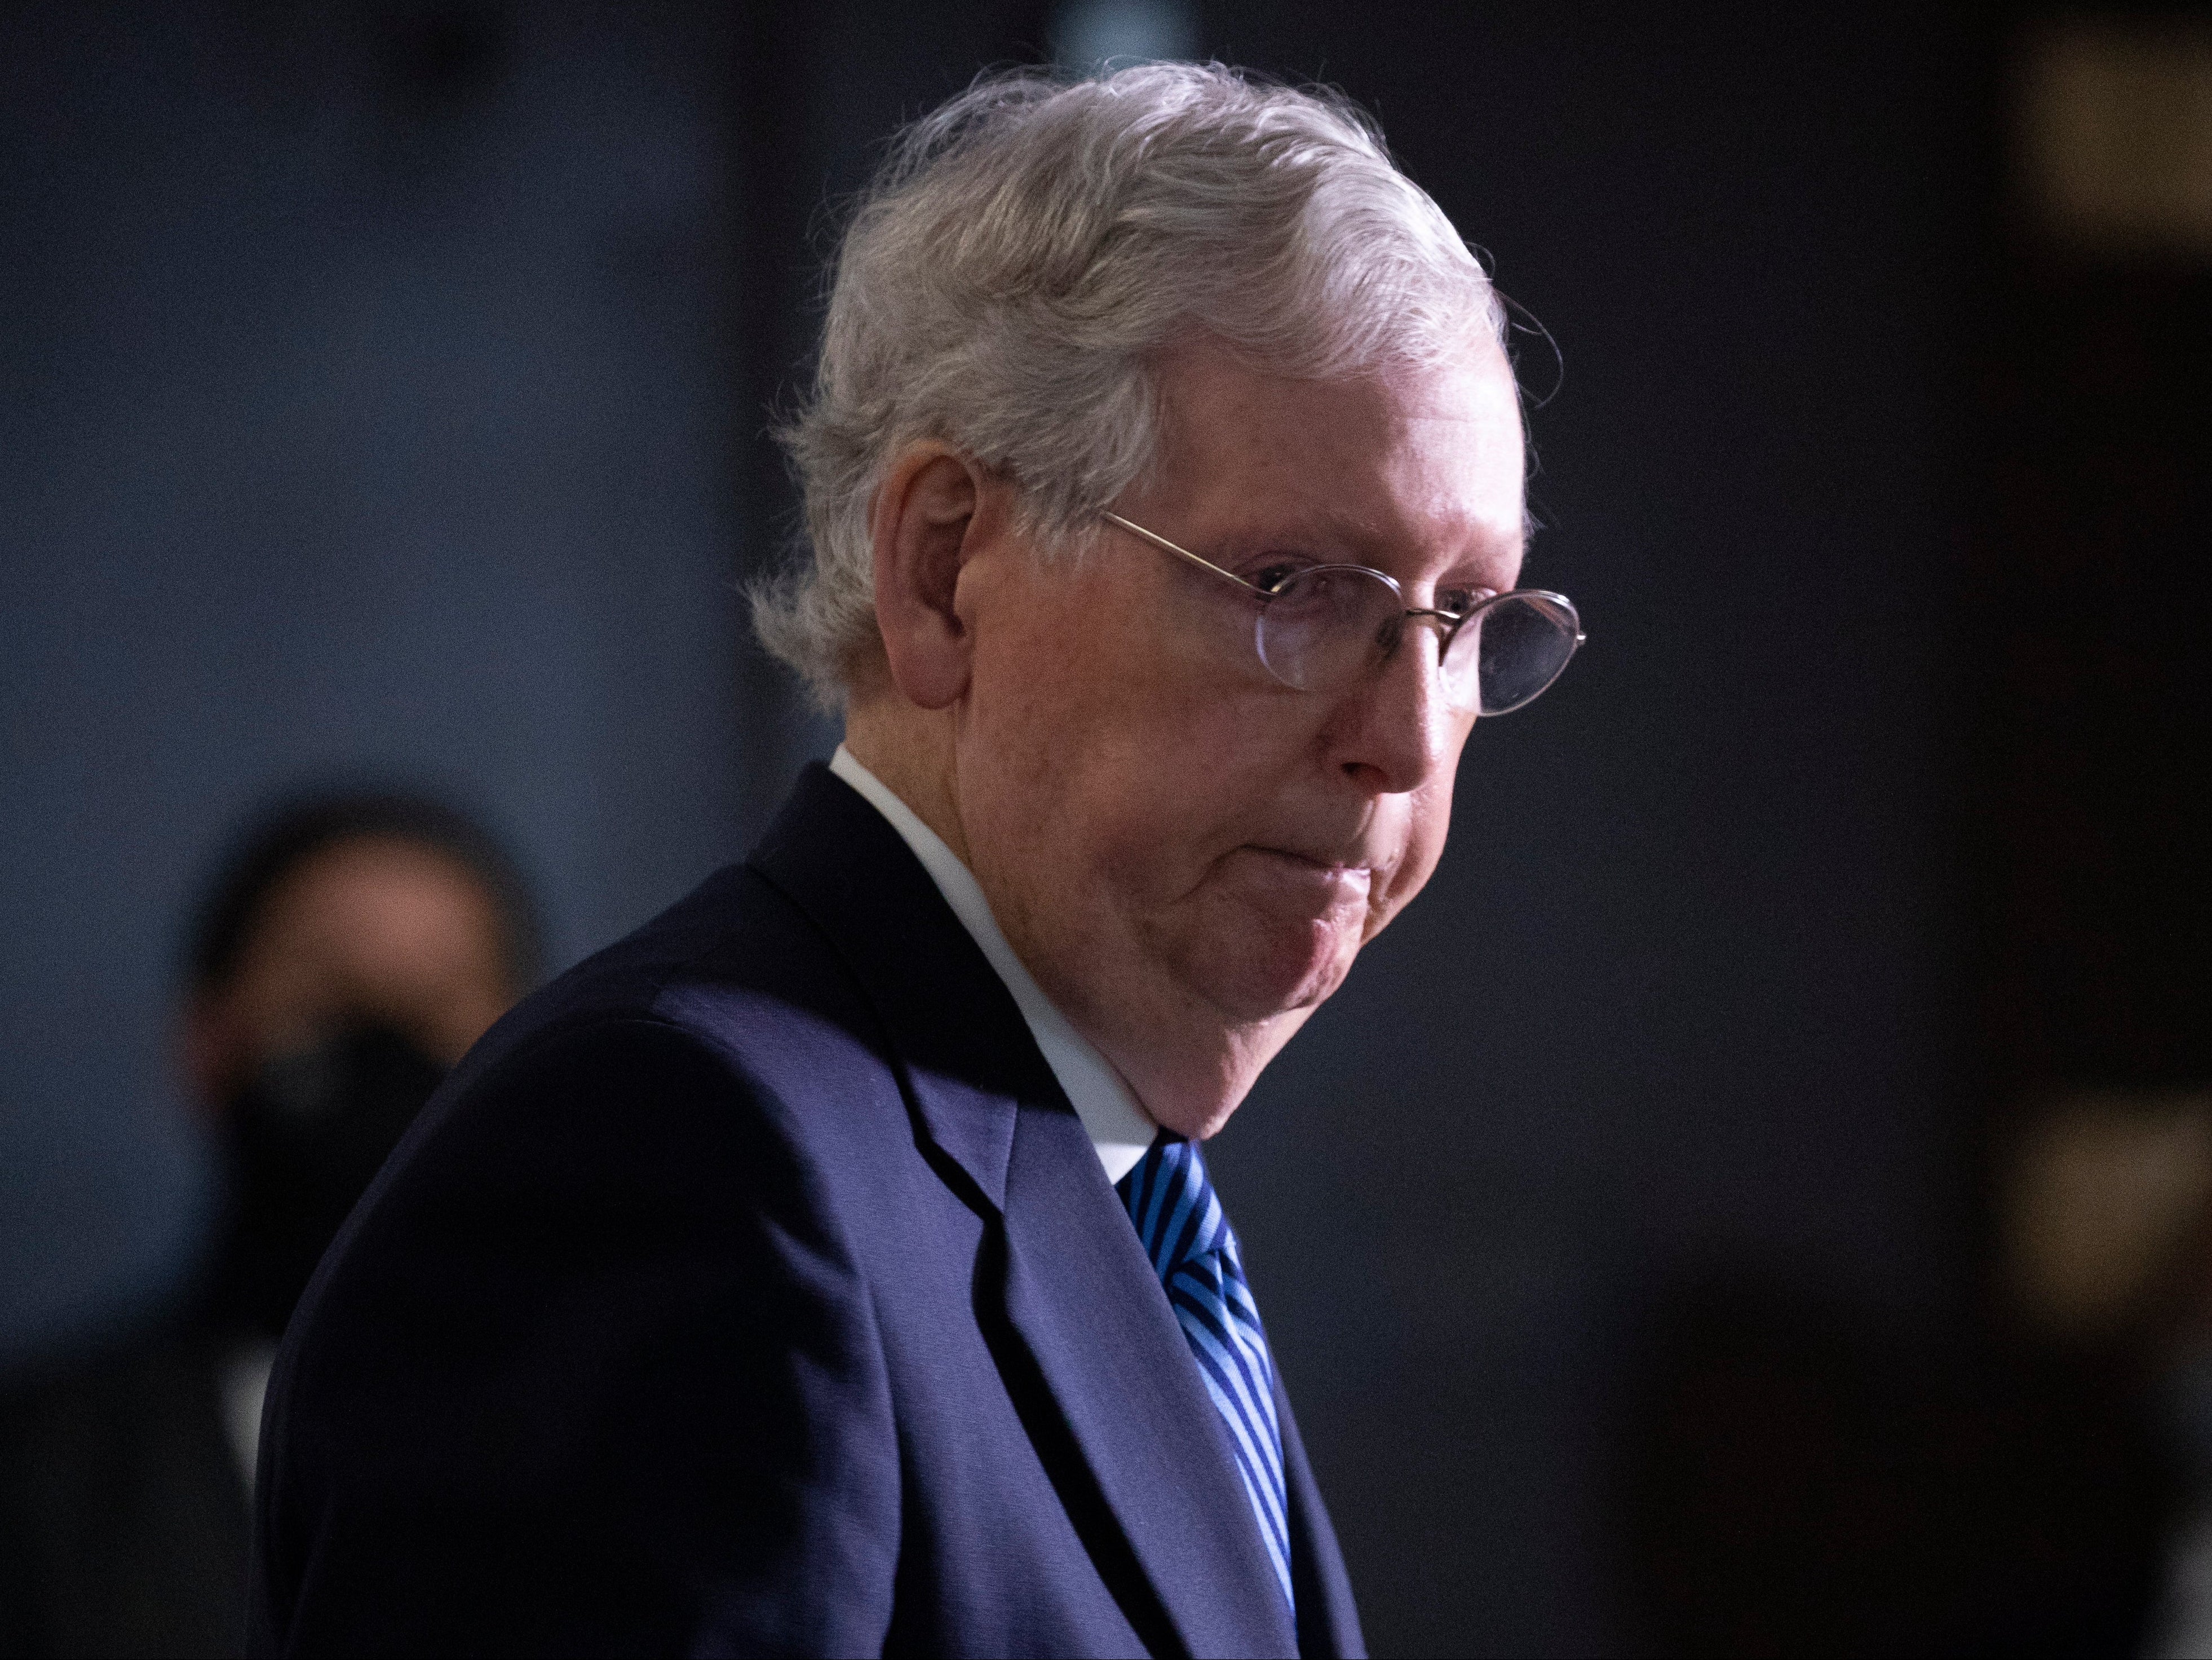 Senate Majority Leader Mitch McConnell is close to securing enough GOP support to hold a vote on President Trump's third Supreme Court nominee before Election Day.